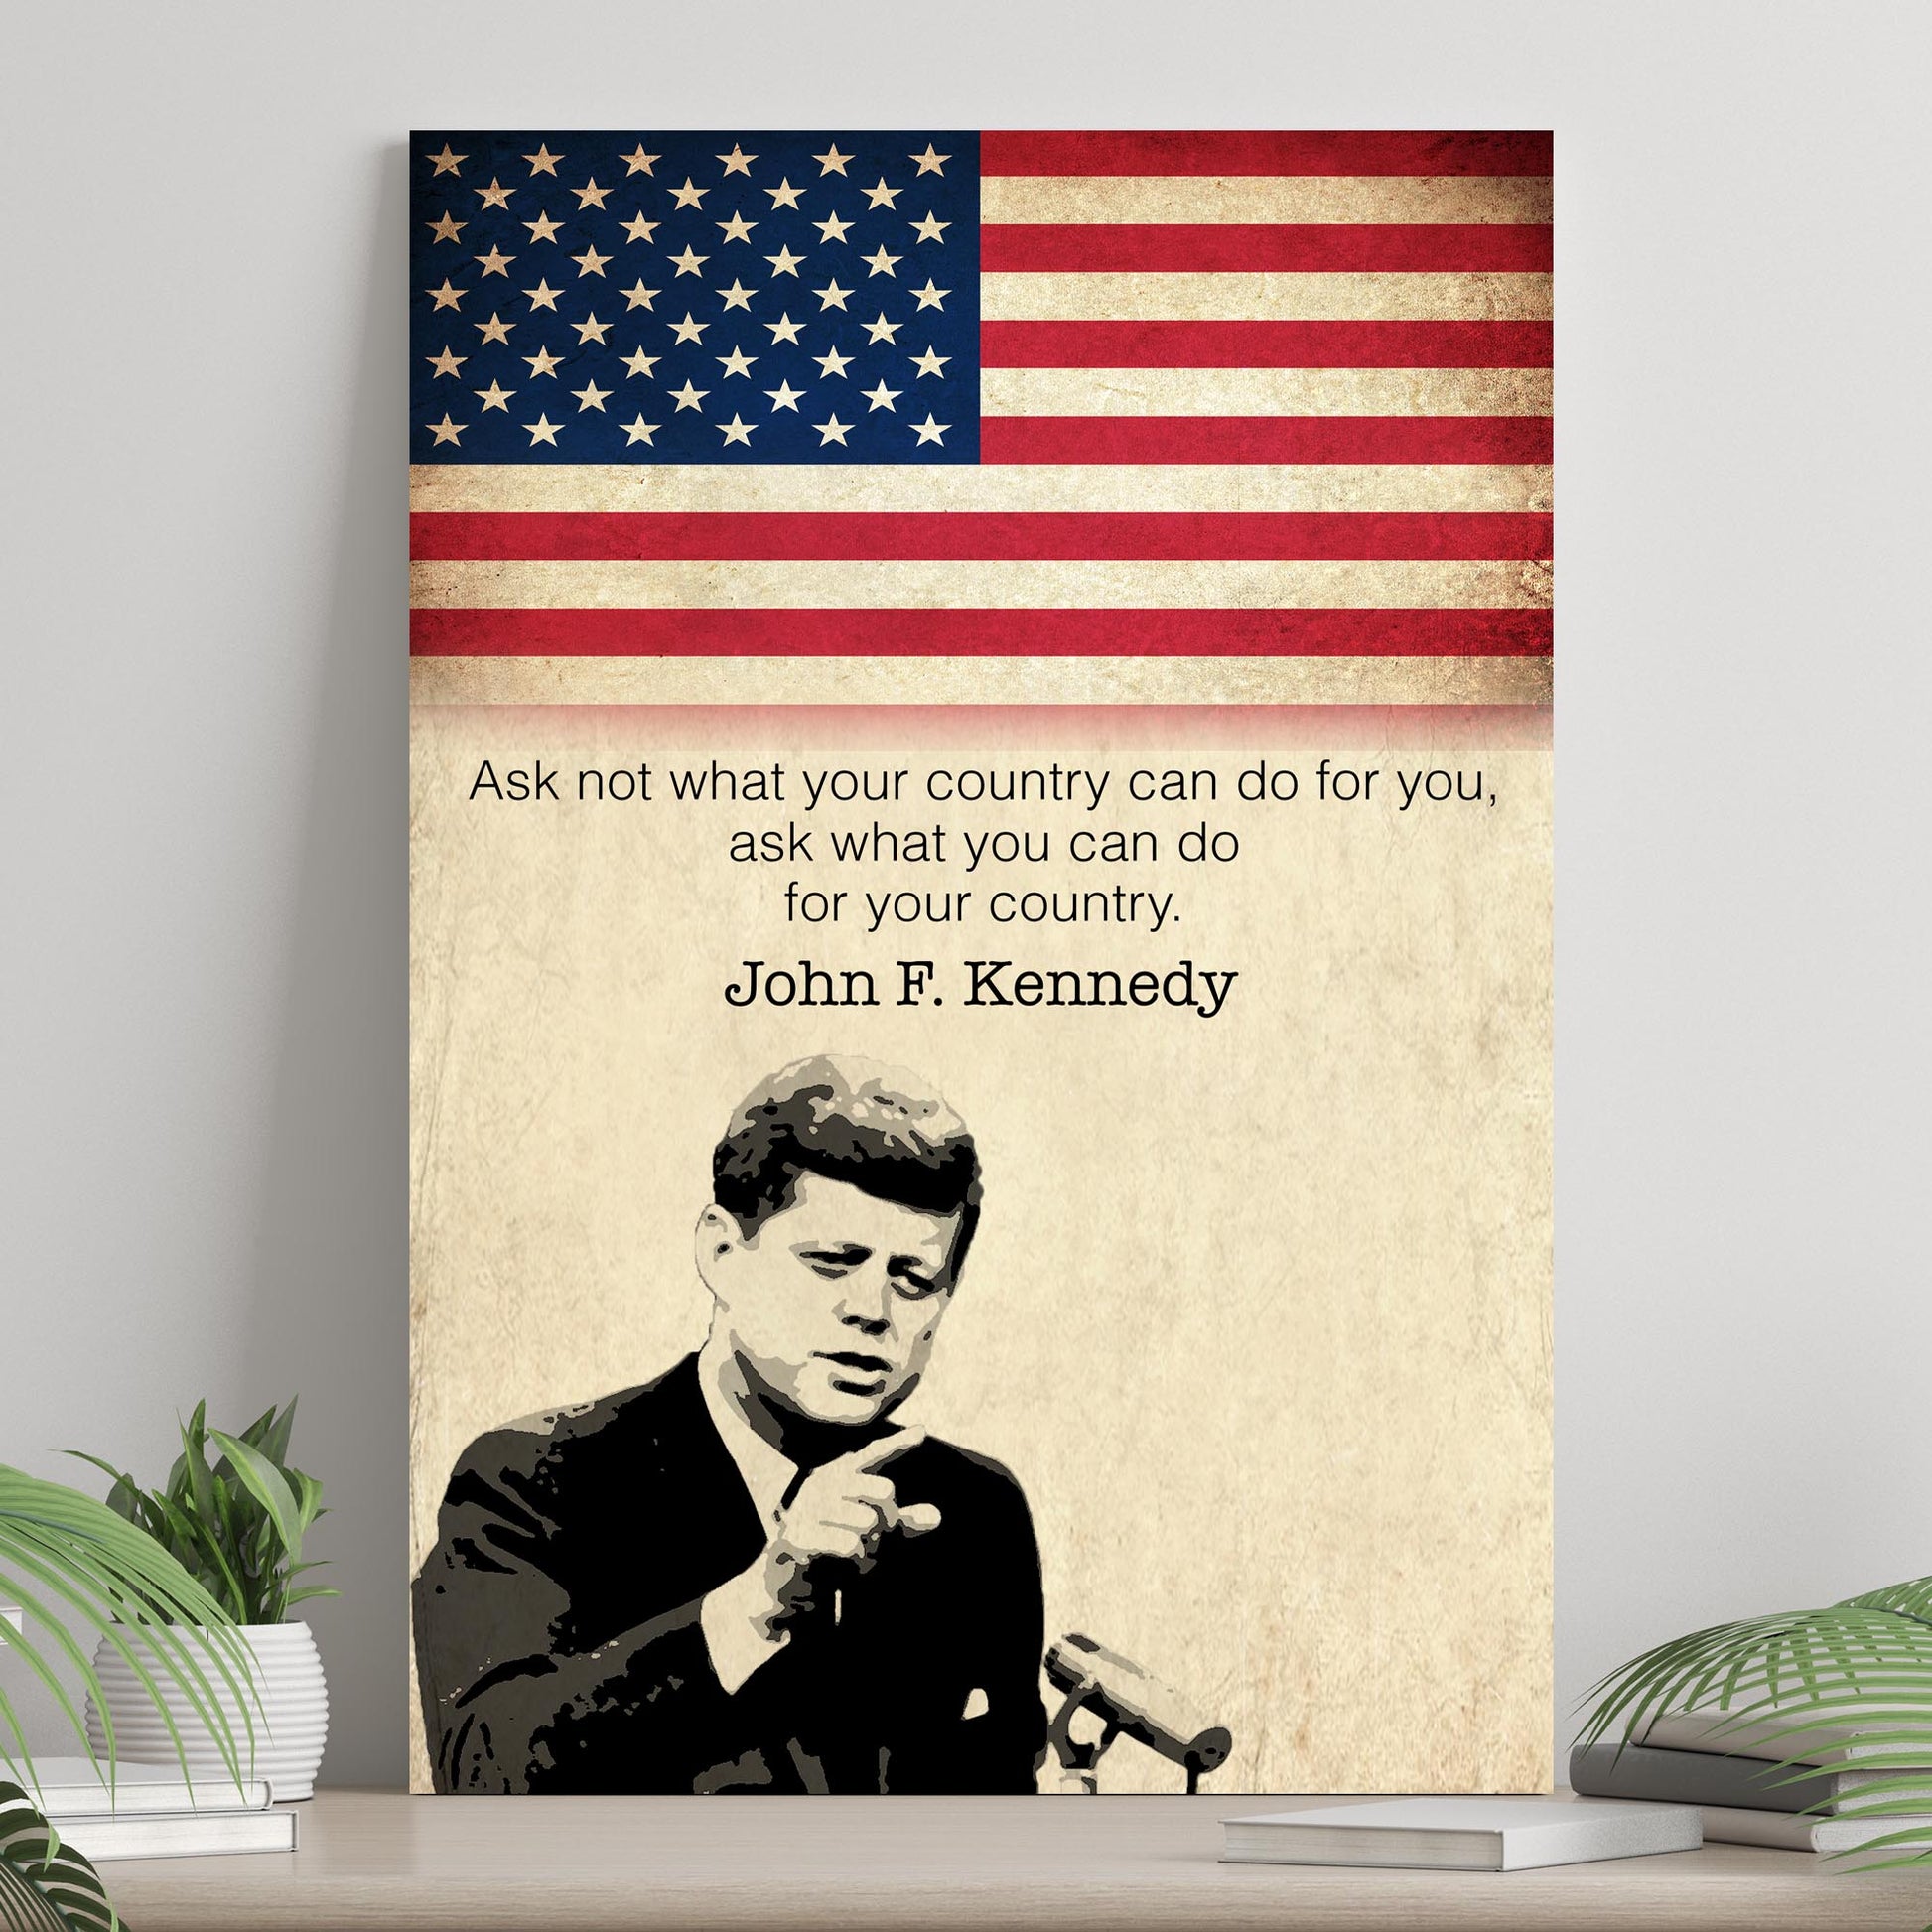 John F. Kennedy Inaugural Address Sign II  - Image by Tailored Canvases